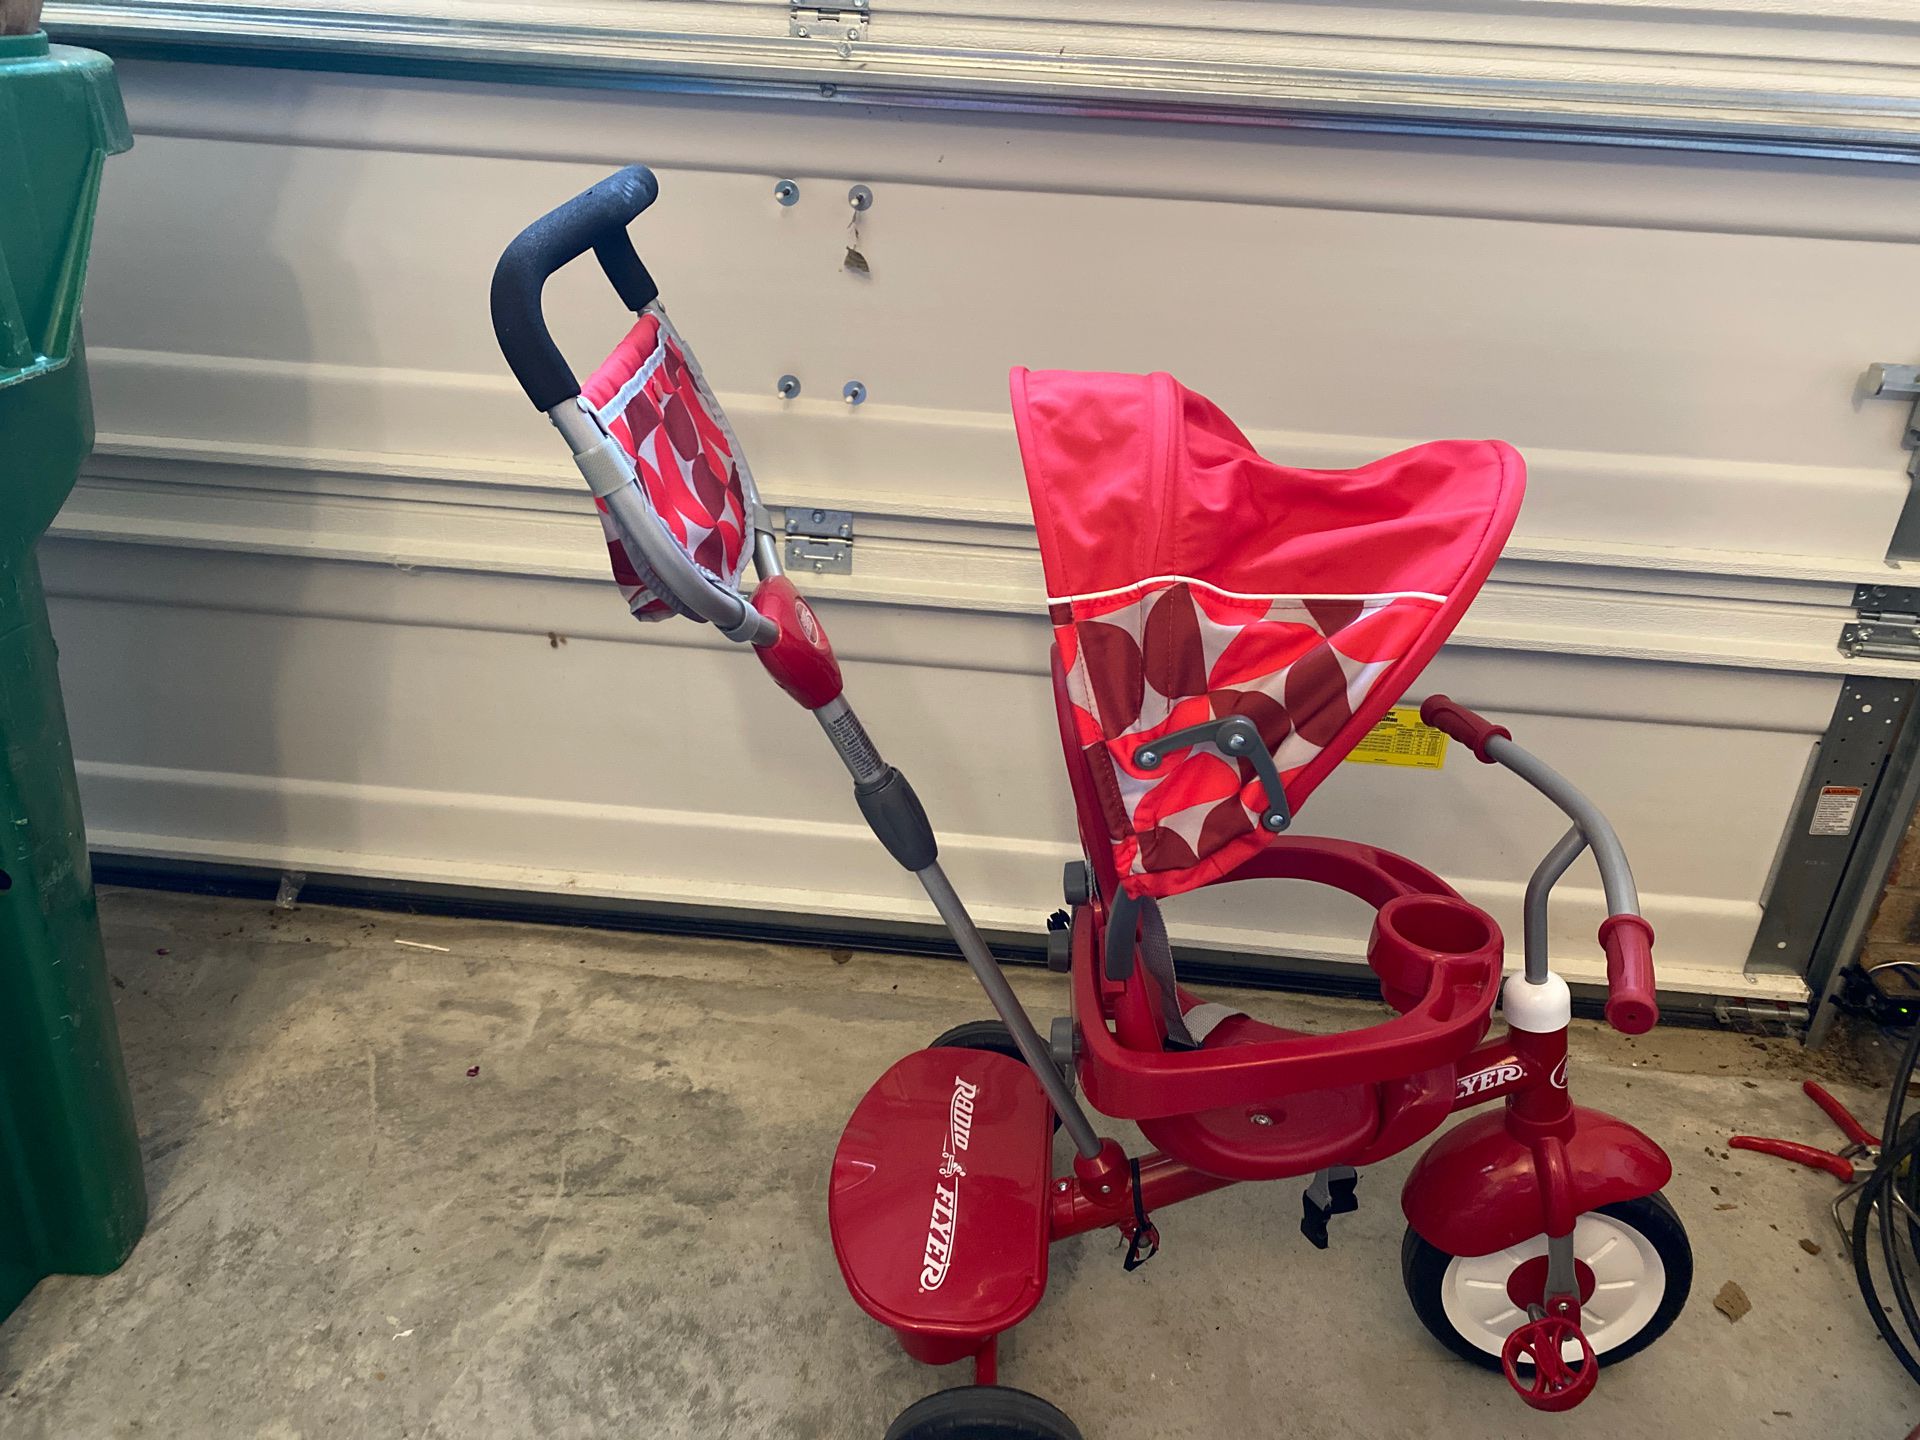 Radio Flyer 4-1 bike for toddlers